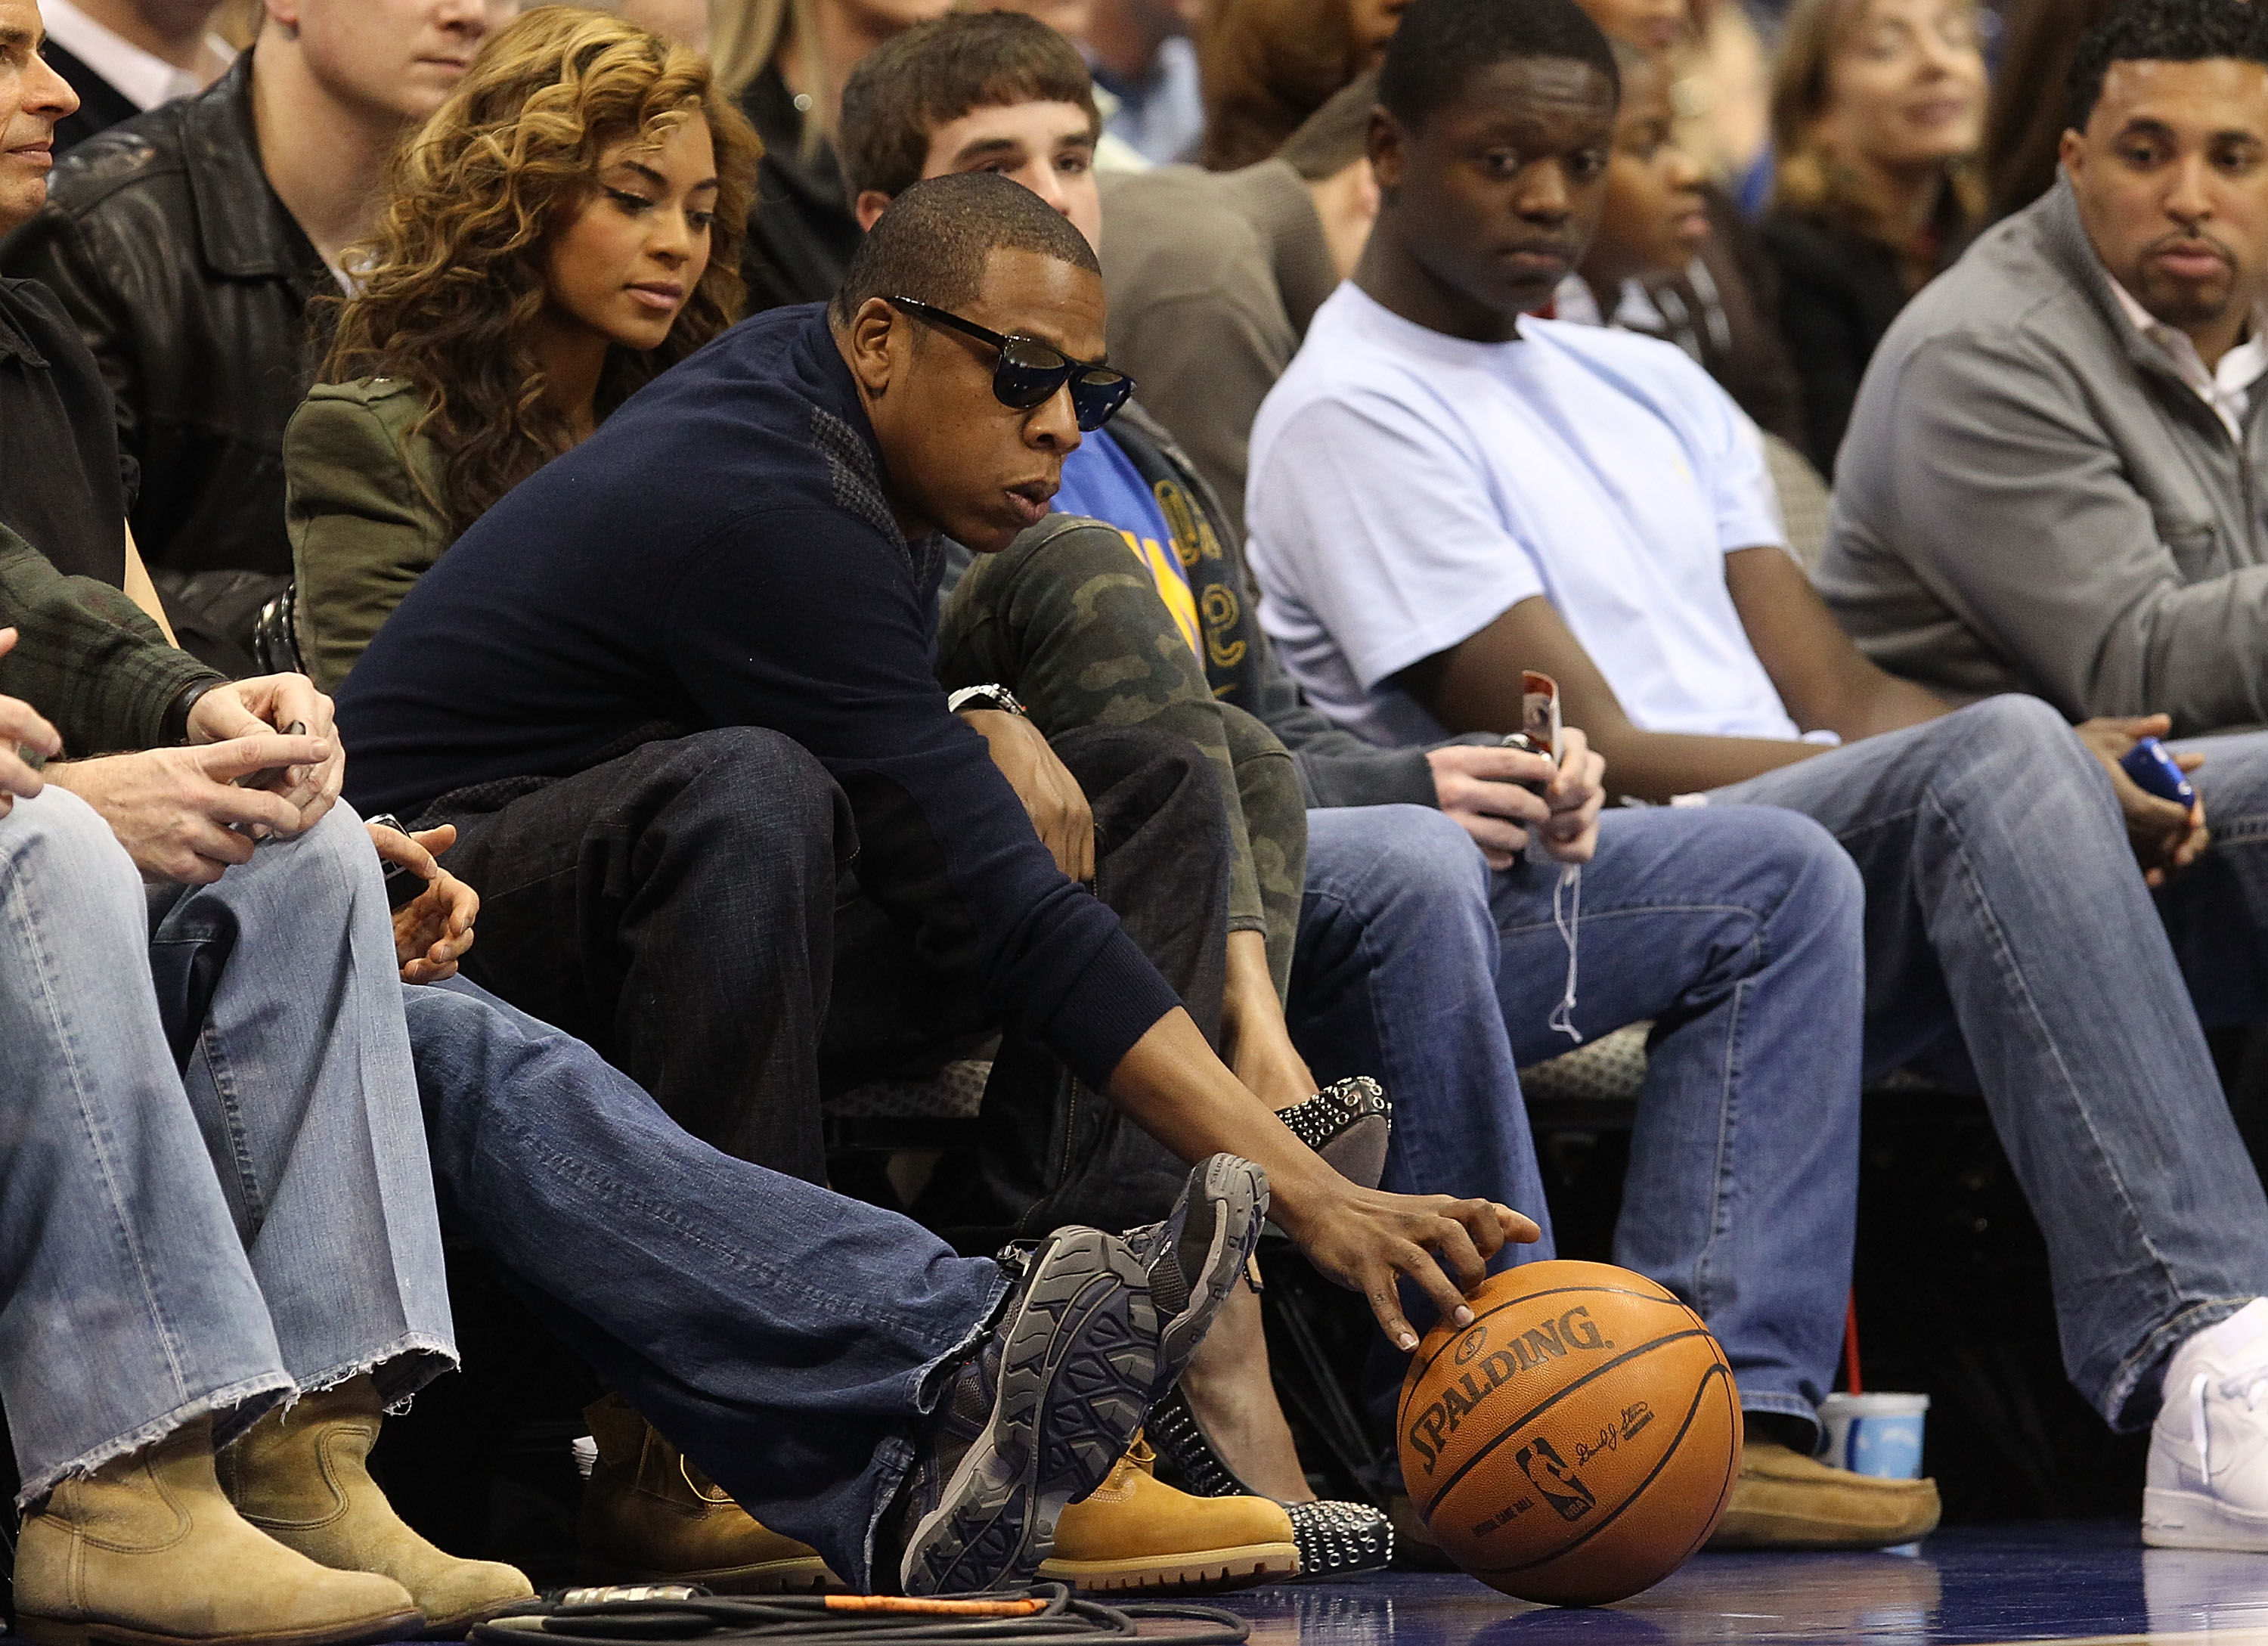 DALLAS - FEBRUARY 24:   Rapper Jay-Z and singer Beyonce Knowles attend a game between the Los Angeles Lakers and Dallas Mavericks on February 24, 2010 at American Airlines Center in Dallas, Texas.  NOTE TO USER: User expressly acknowledges and agrees that